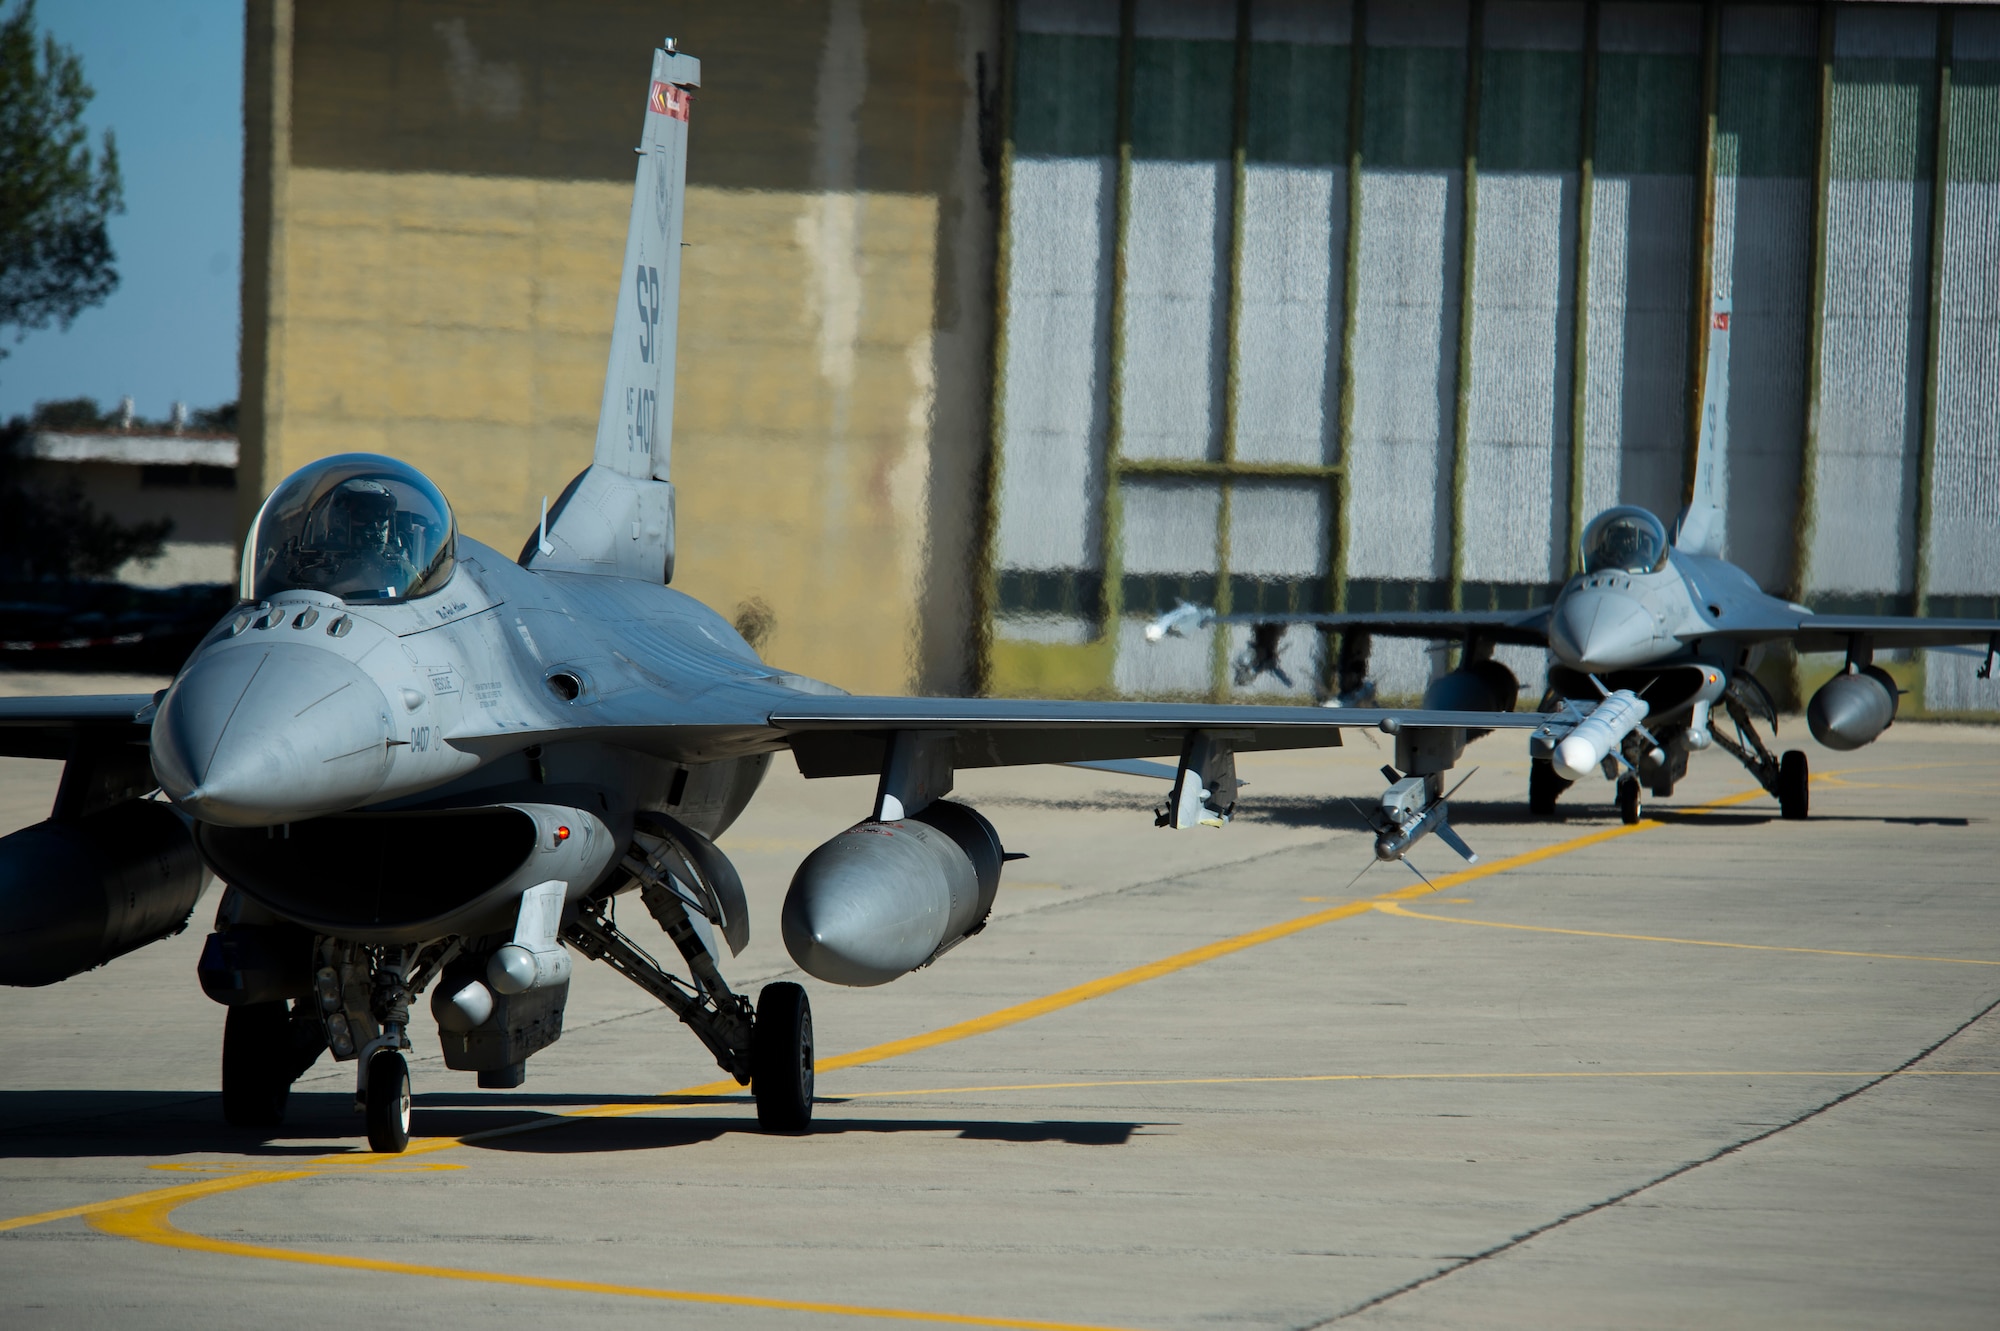 BEJA AIR BASE, Portugal – Two F-16 Fighting Falcon fighter aircraft, assigned to the 480th Fighter Squadron at Spangdahlem Air Base, Germany, taxi towards the runway before a mission at Exercise Trident Juncture 2015 at Beja Air Base, Portugal, Oct. 22, 2015. The 480th FS deployed five F-16s and approximately 130 Airmen to Beja in support of Trident Juncture 2015, the largest NATO exercise conducted in the past 20 years. (U.S. Air Force photo by Airman 1st Class Luke Kitterman/Released)  